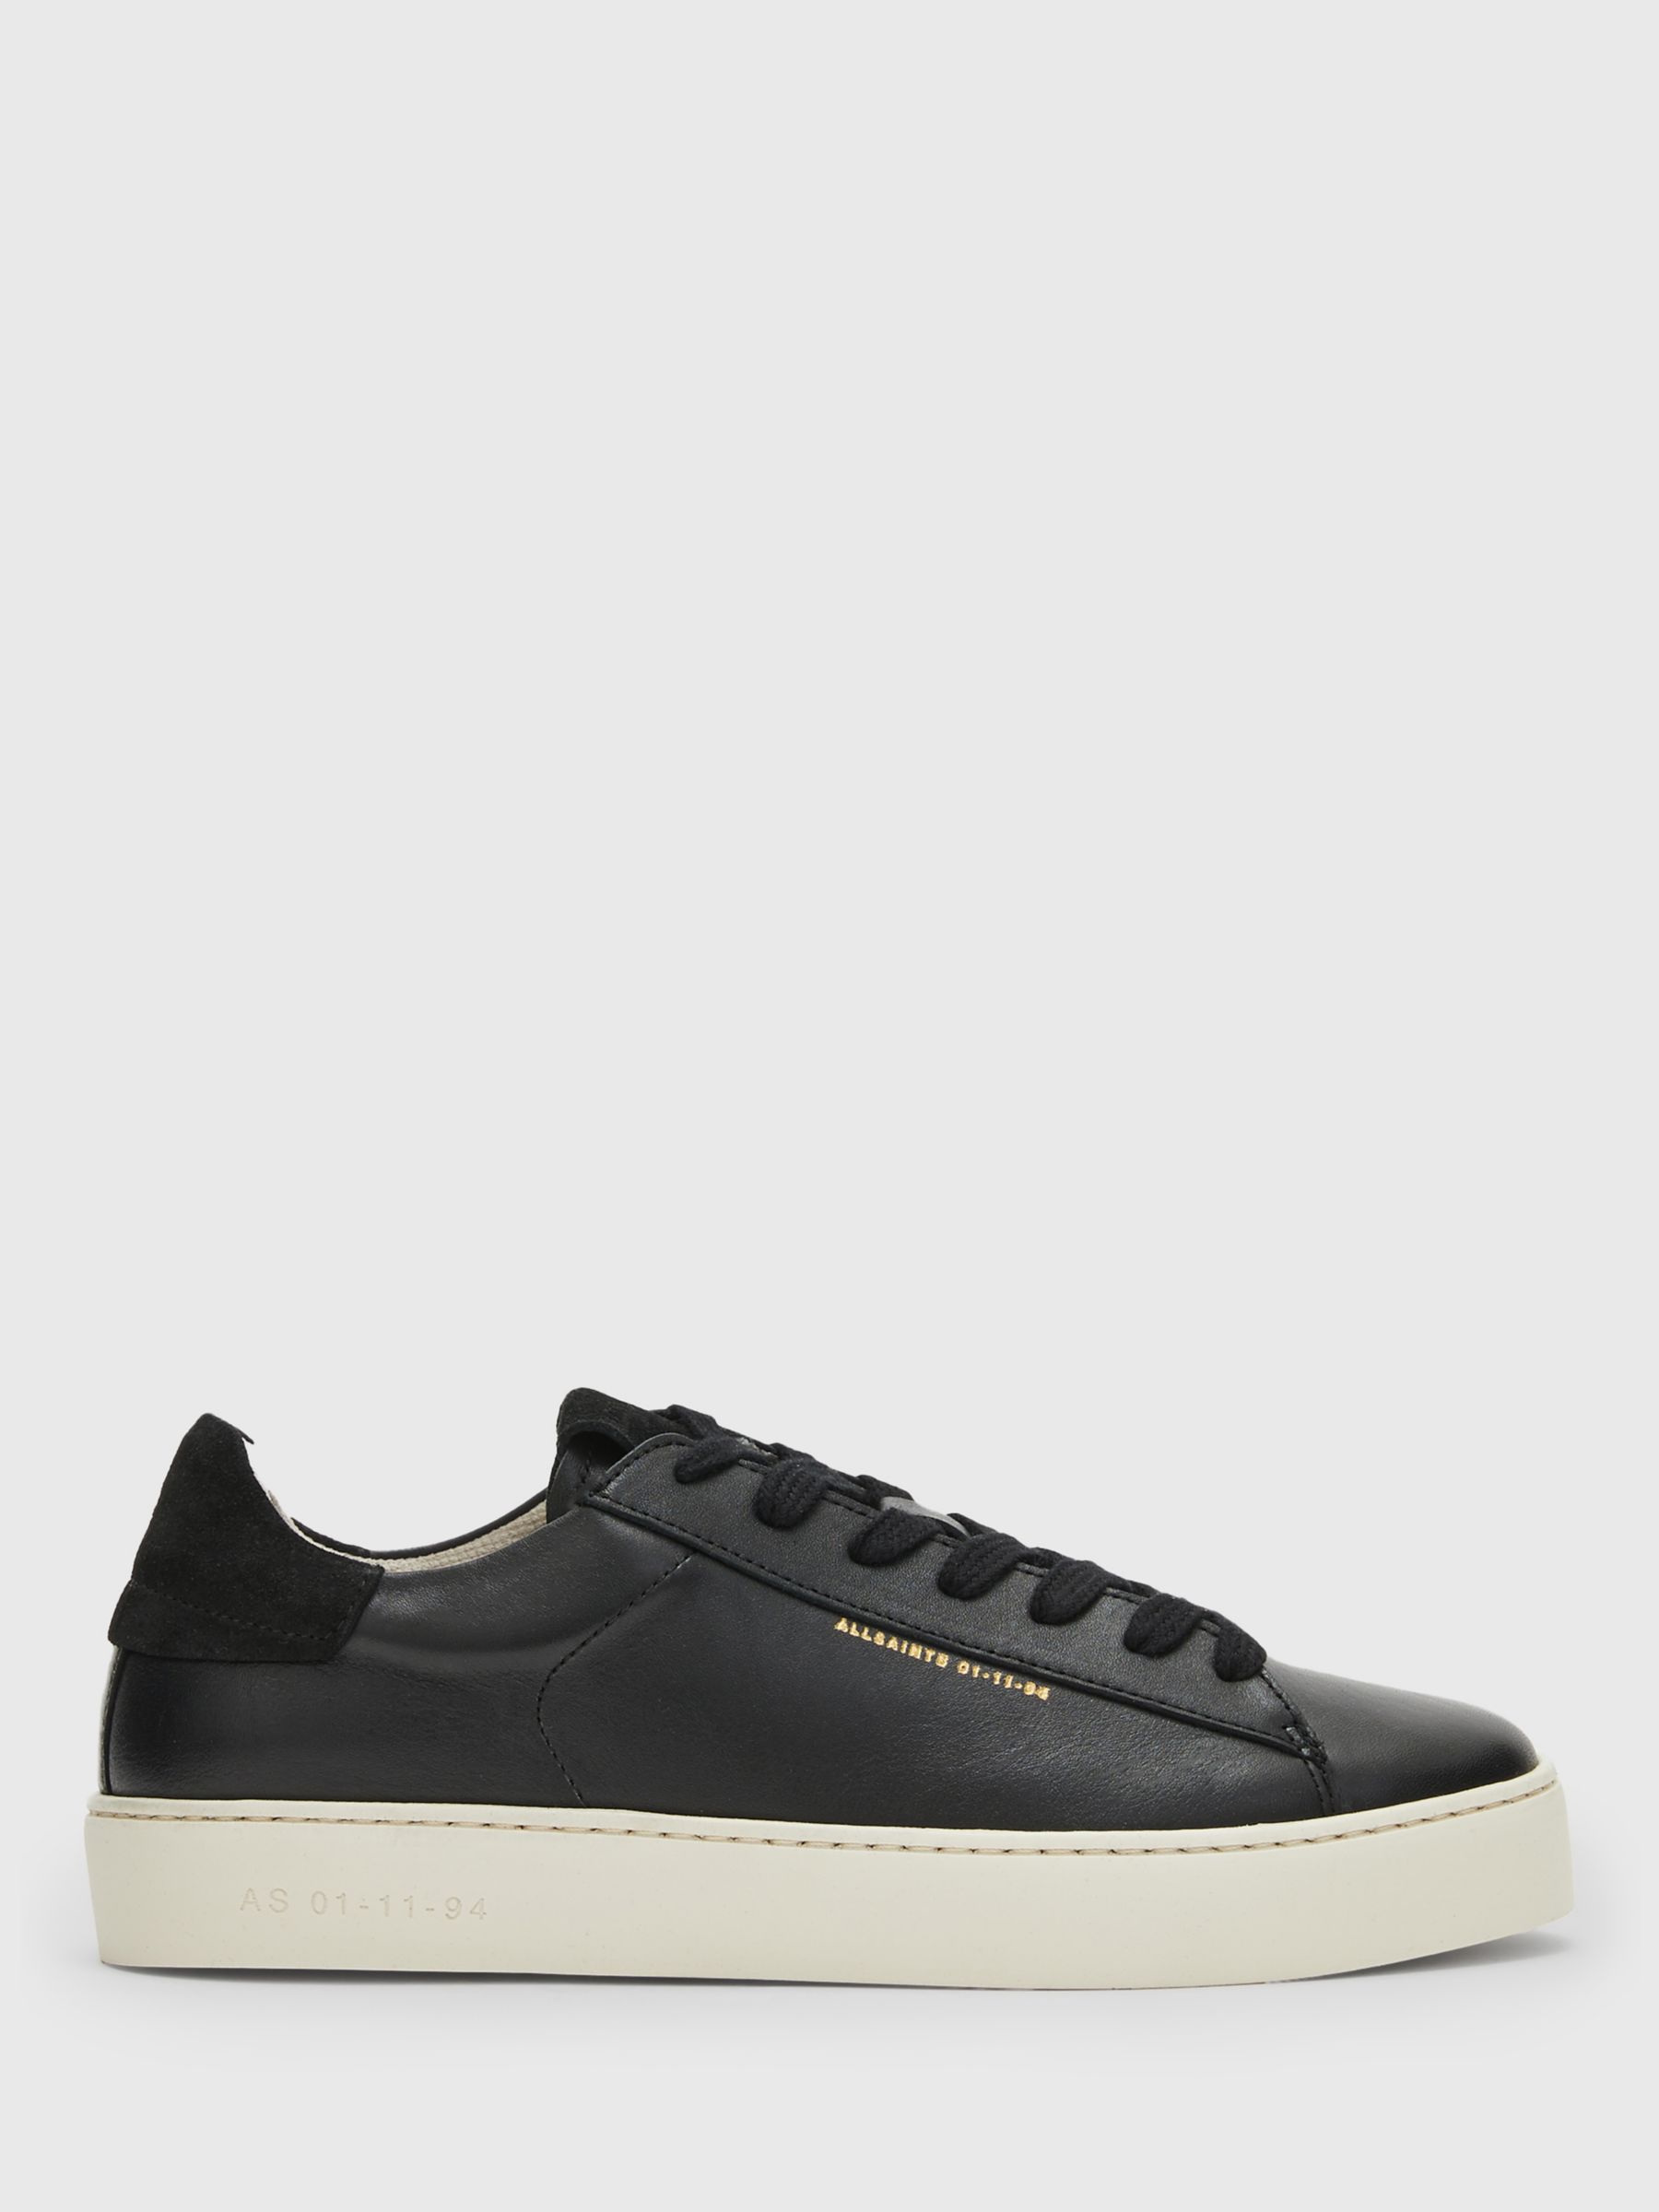 AllSaints Shana Leather Lace Up Trainers, Black